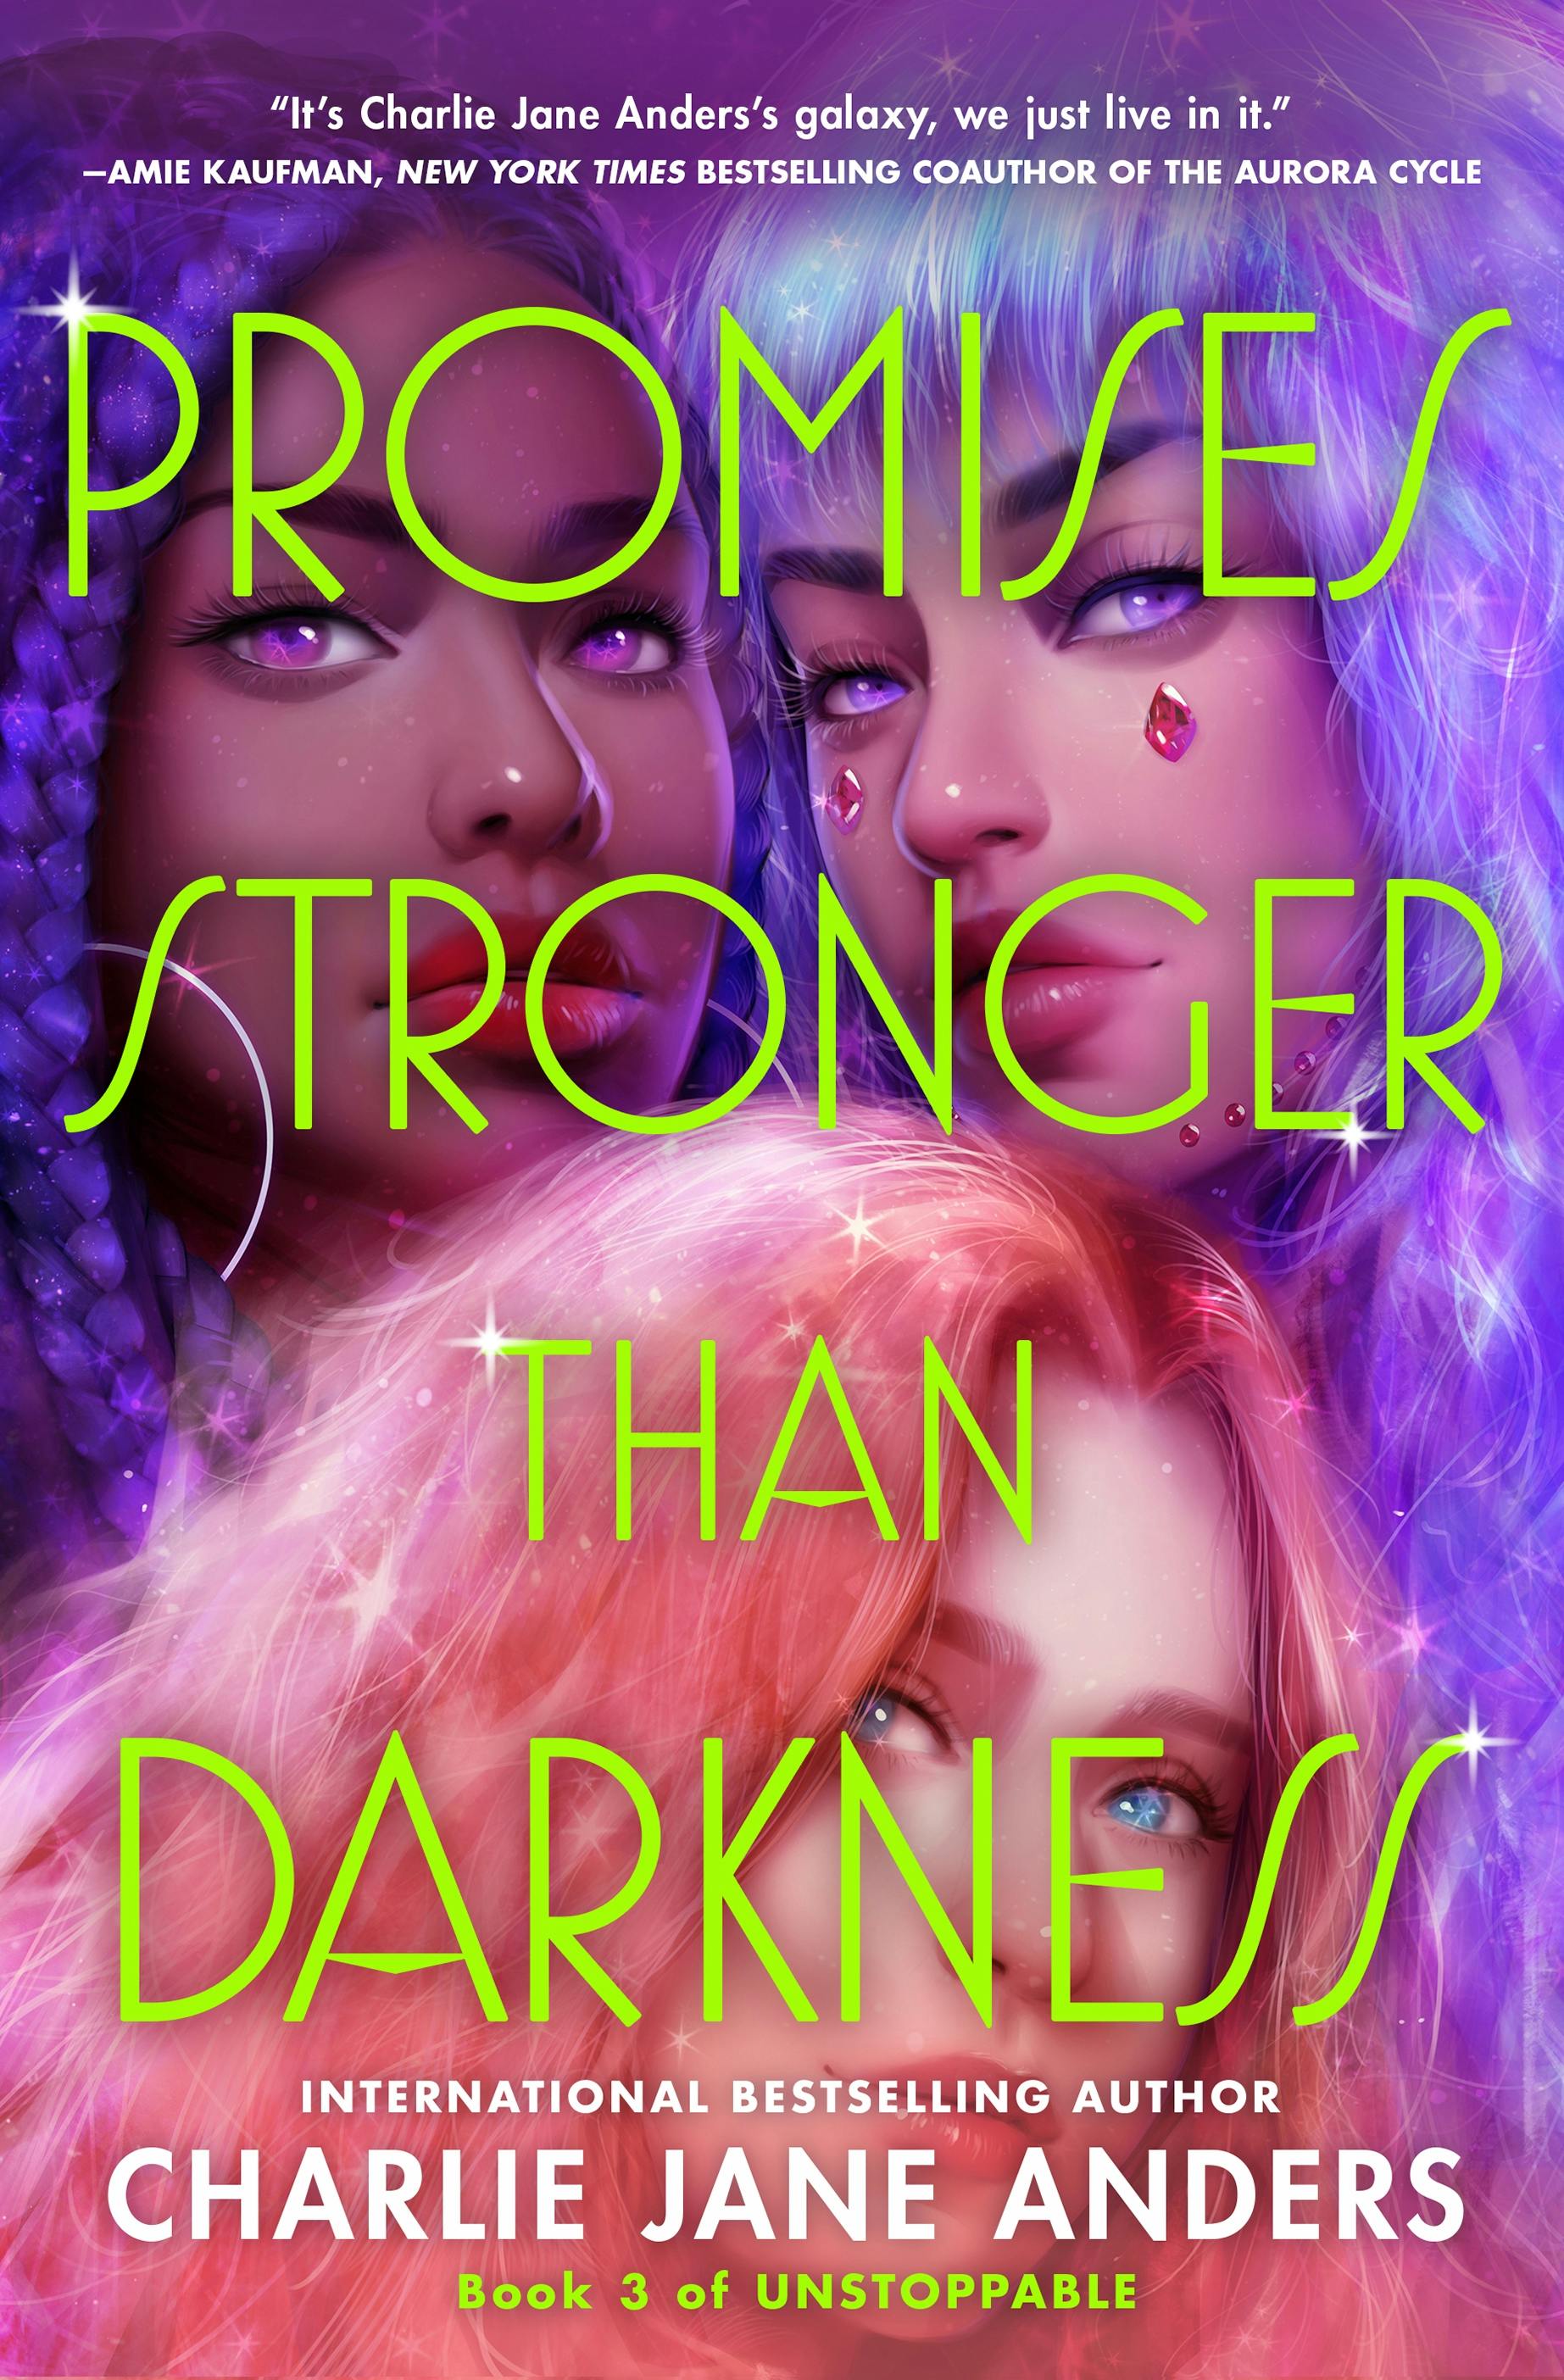 Image of Promises Stronger Than Darkness